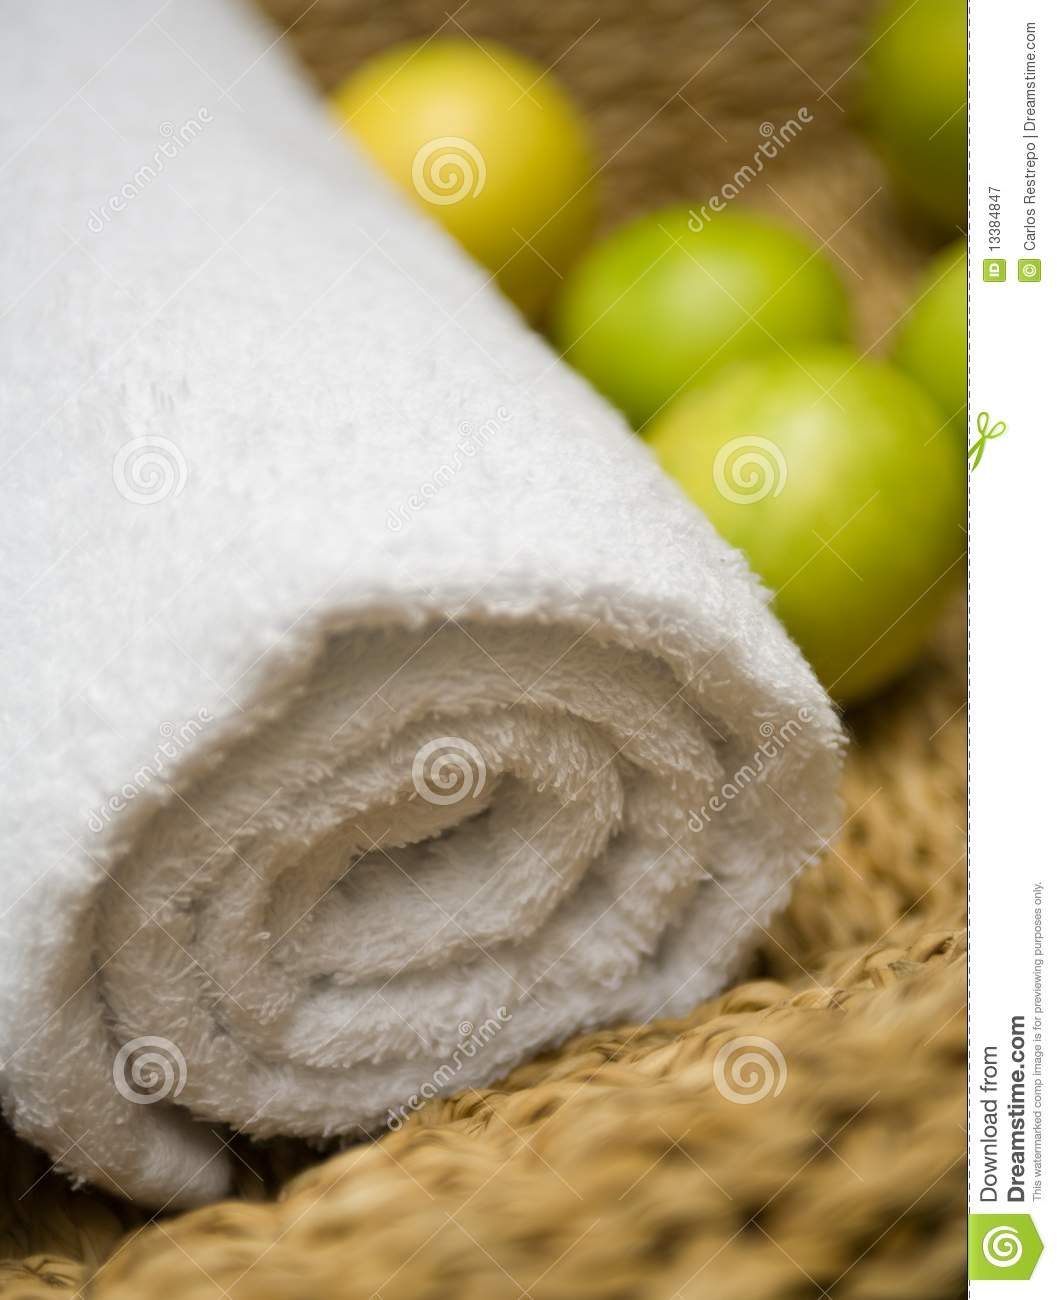 Rolled Up Bath Towel Royalty Free Stock Photography   Image  13384847